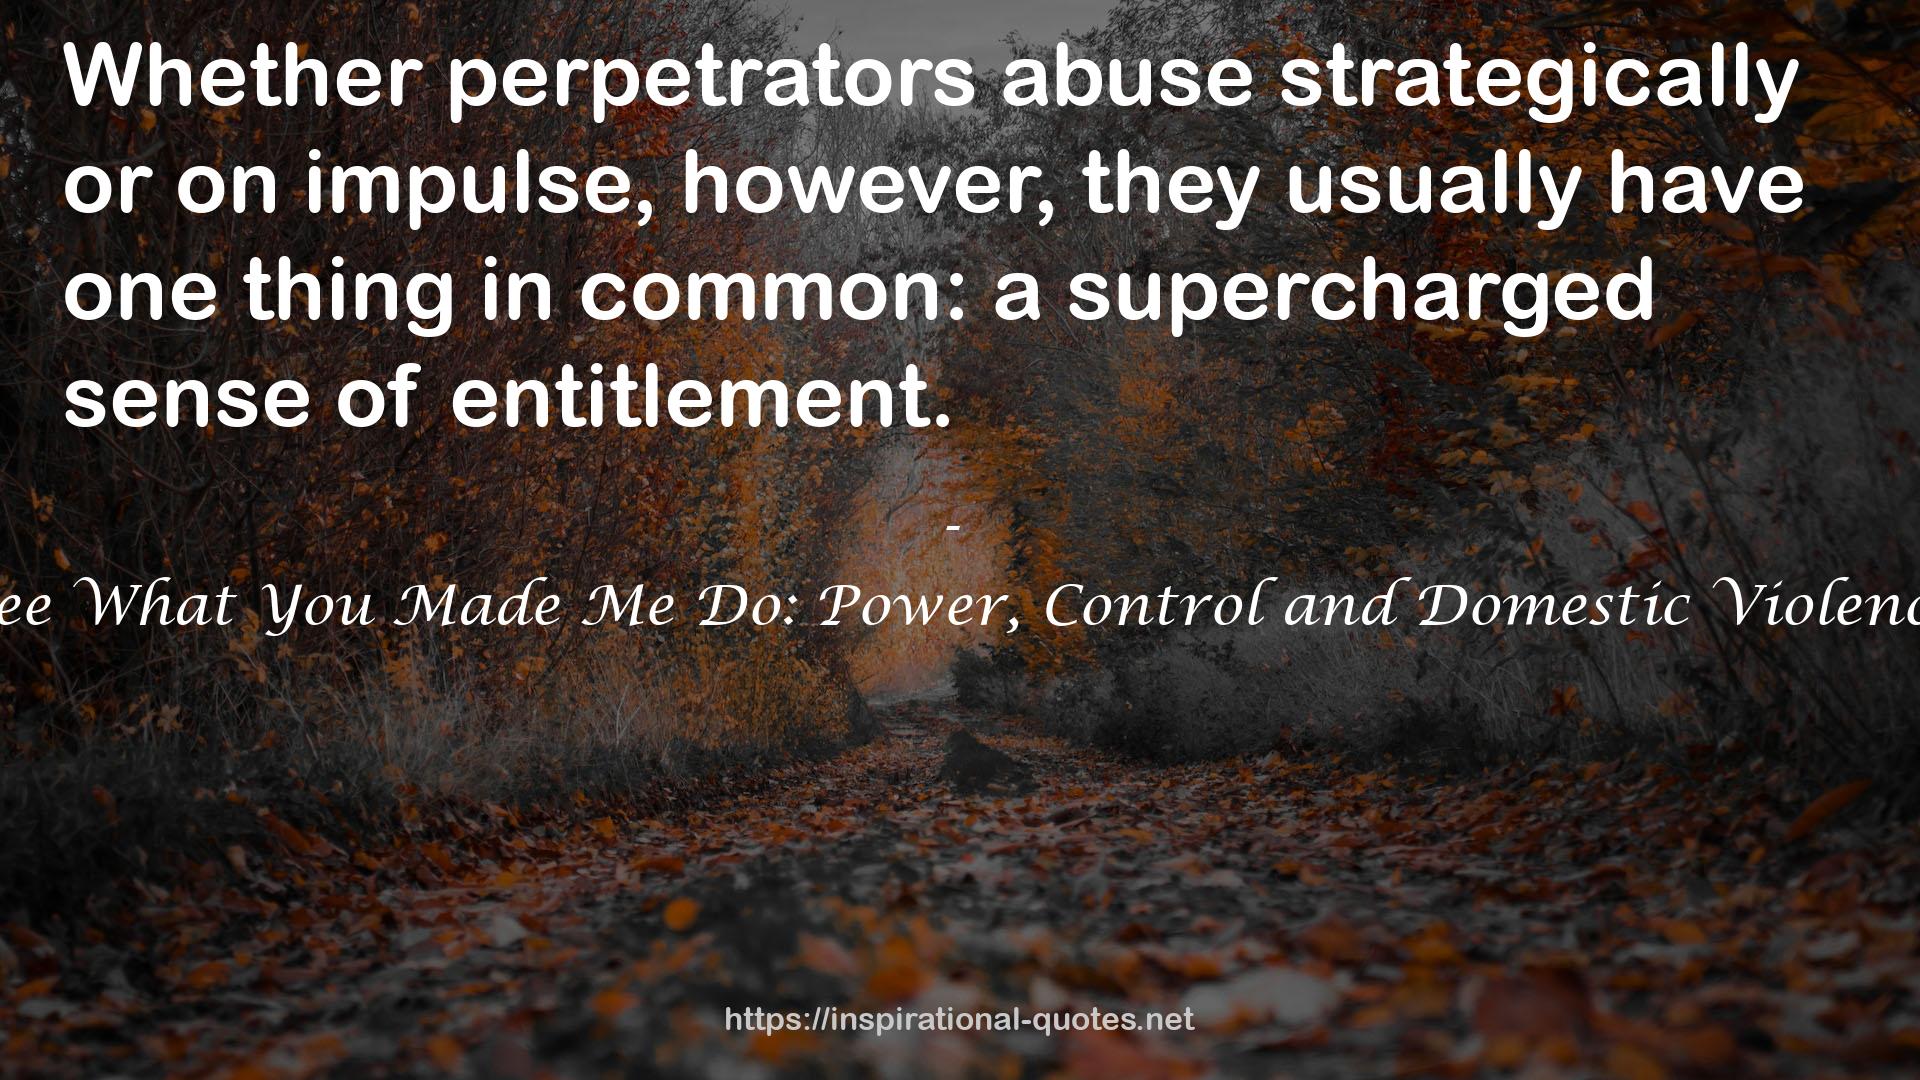 See What You Made Me Do: Power, Control and Domestic Violence QUOTES